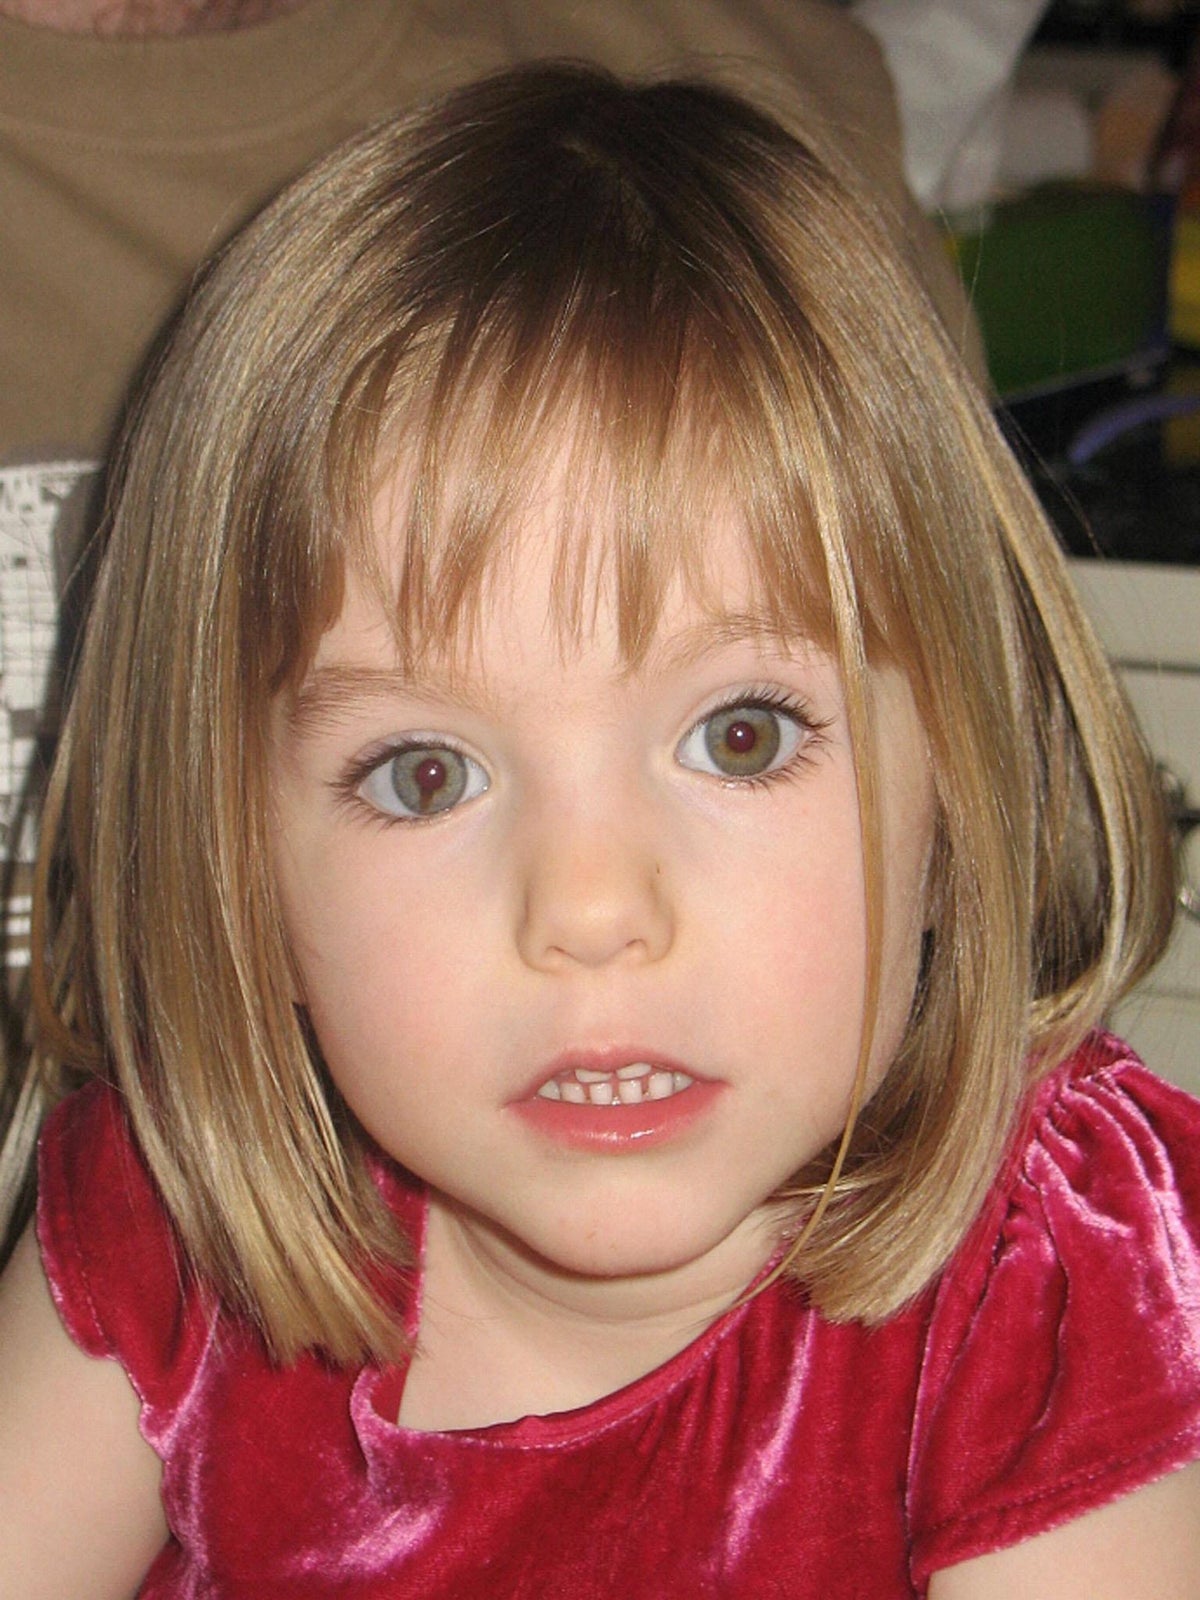 Madeleine McCann suspect to stand trial on five separate sexual assault charges